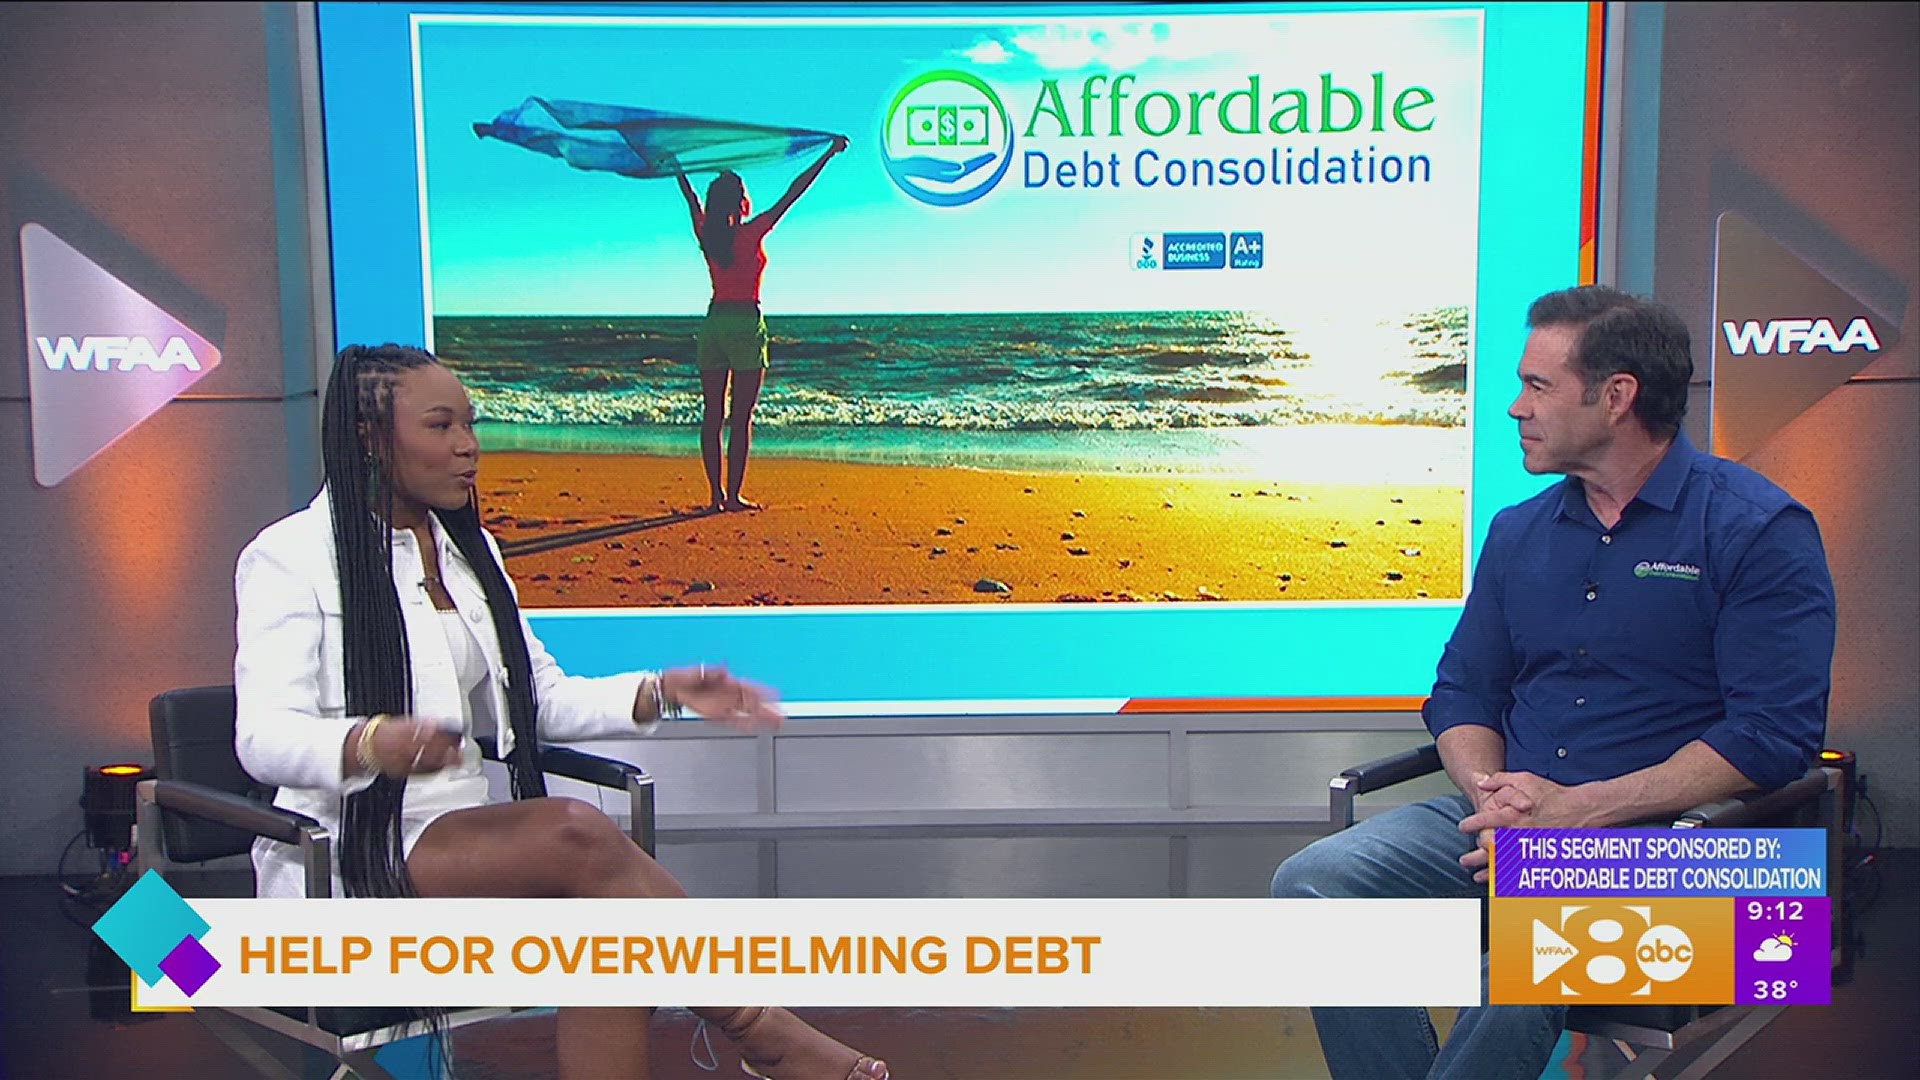 This segment is sponsored by: Affordable Debt Consolidation